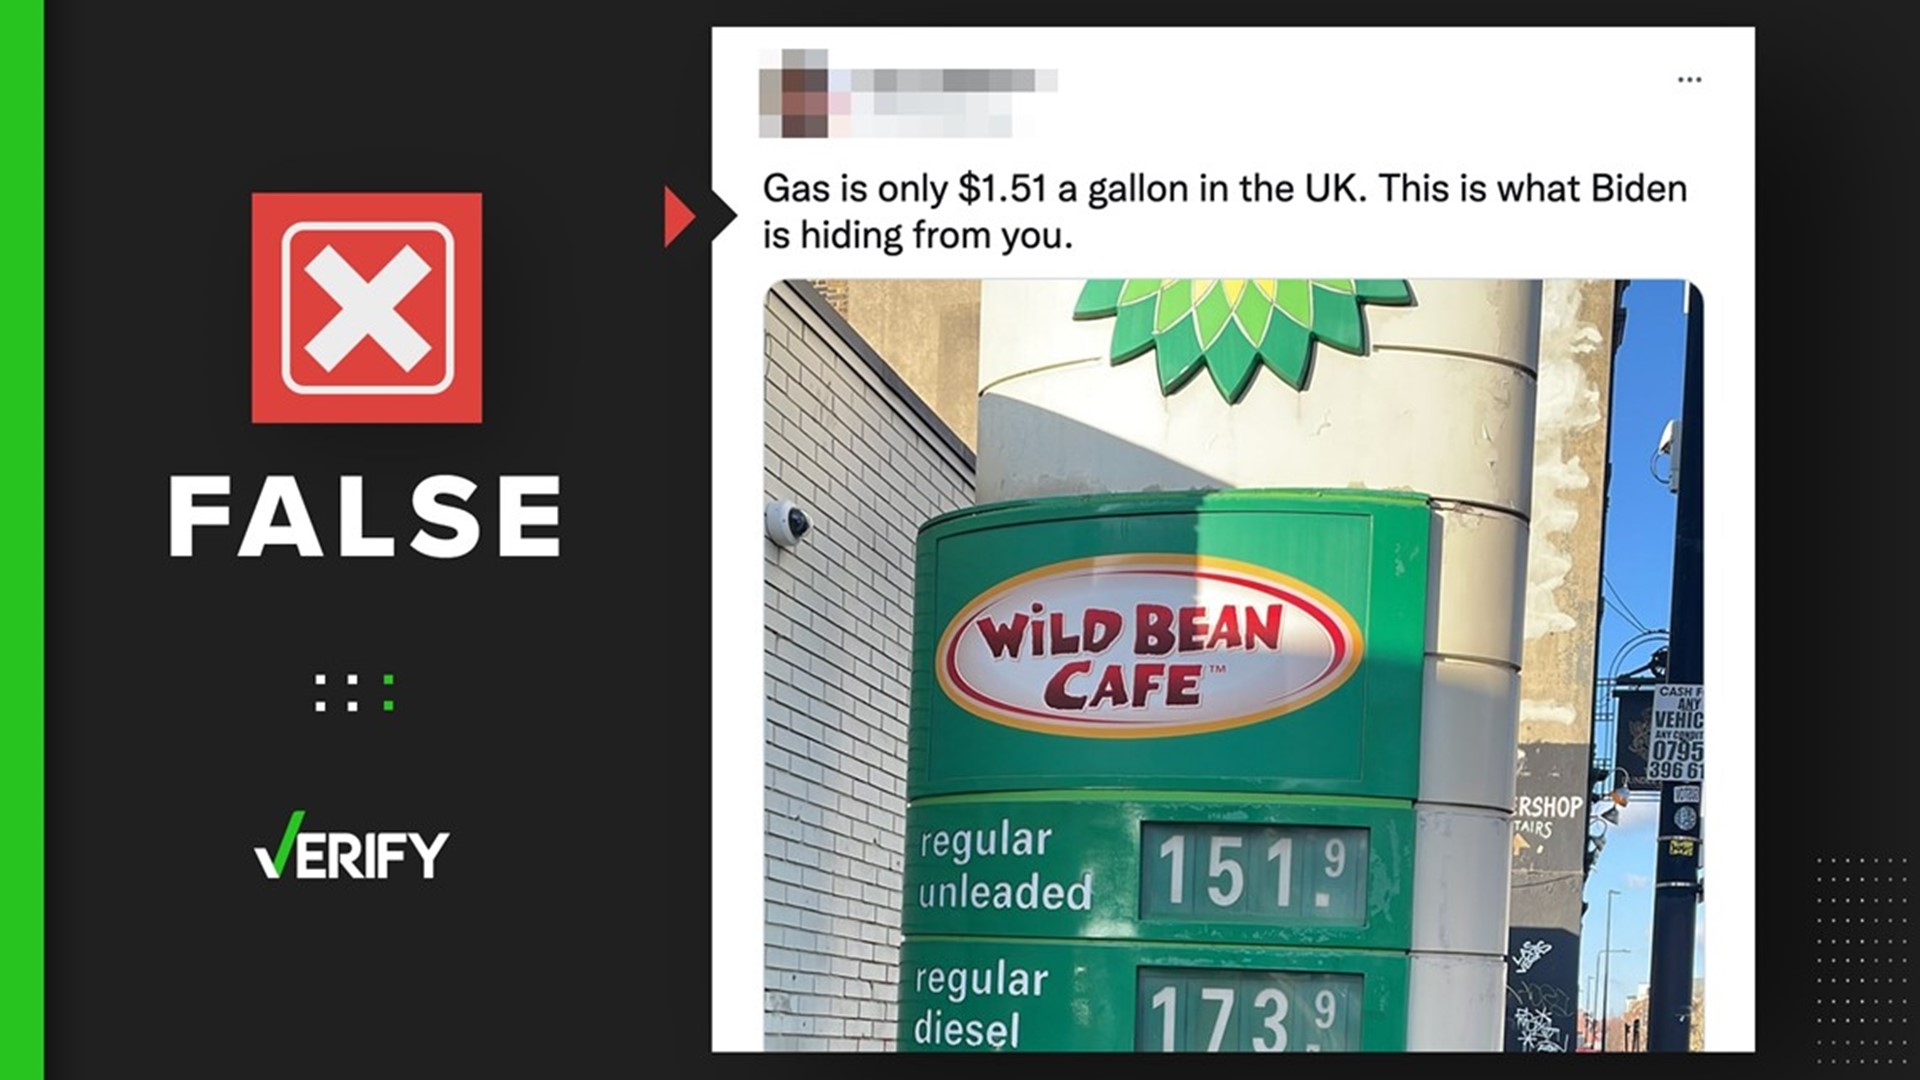 A viral photo claiming to show gas prices in the United Kingdom is misleading. Gas is actually closer to $7 per gallon in the UK.